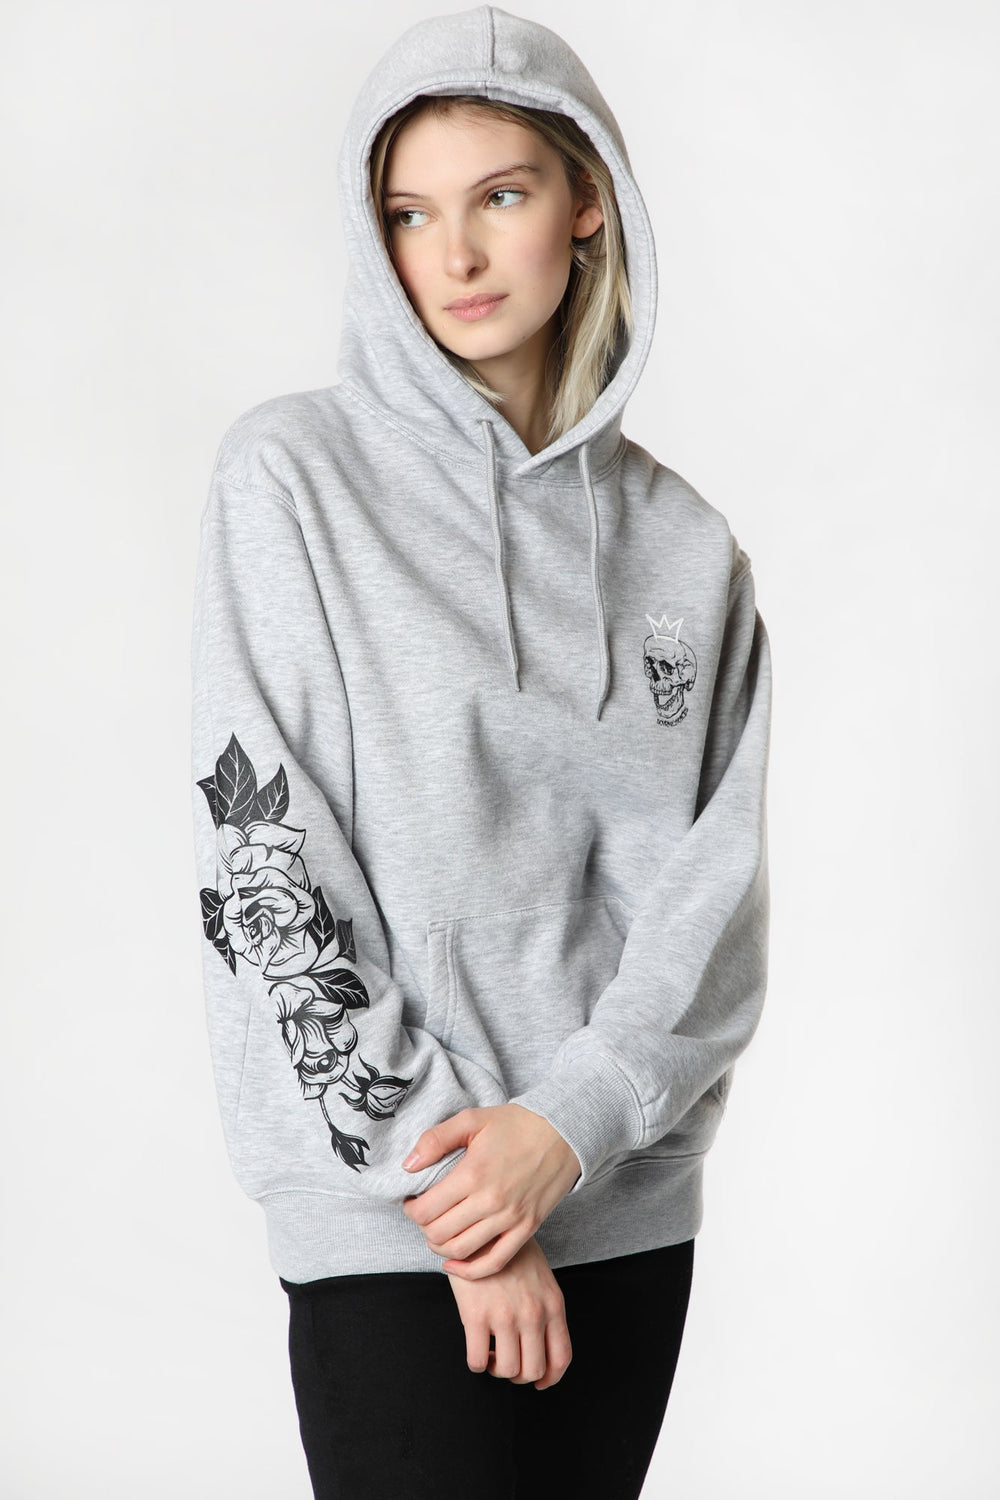 Womens Sovrn Voices Skull and Roses Graphic Hoodie Womens Sovrn Voices Skull and Roses Graphic Hoodie